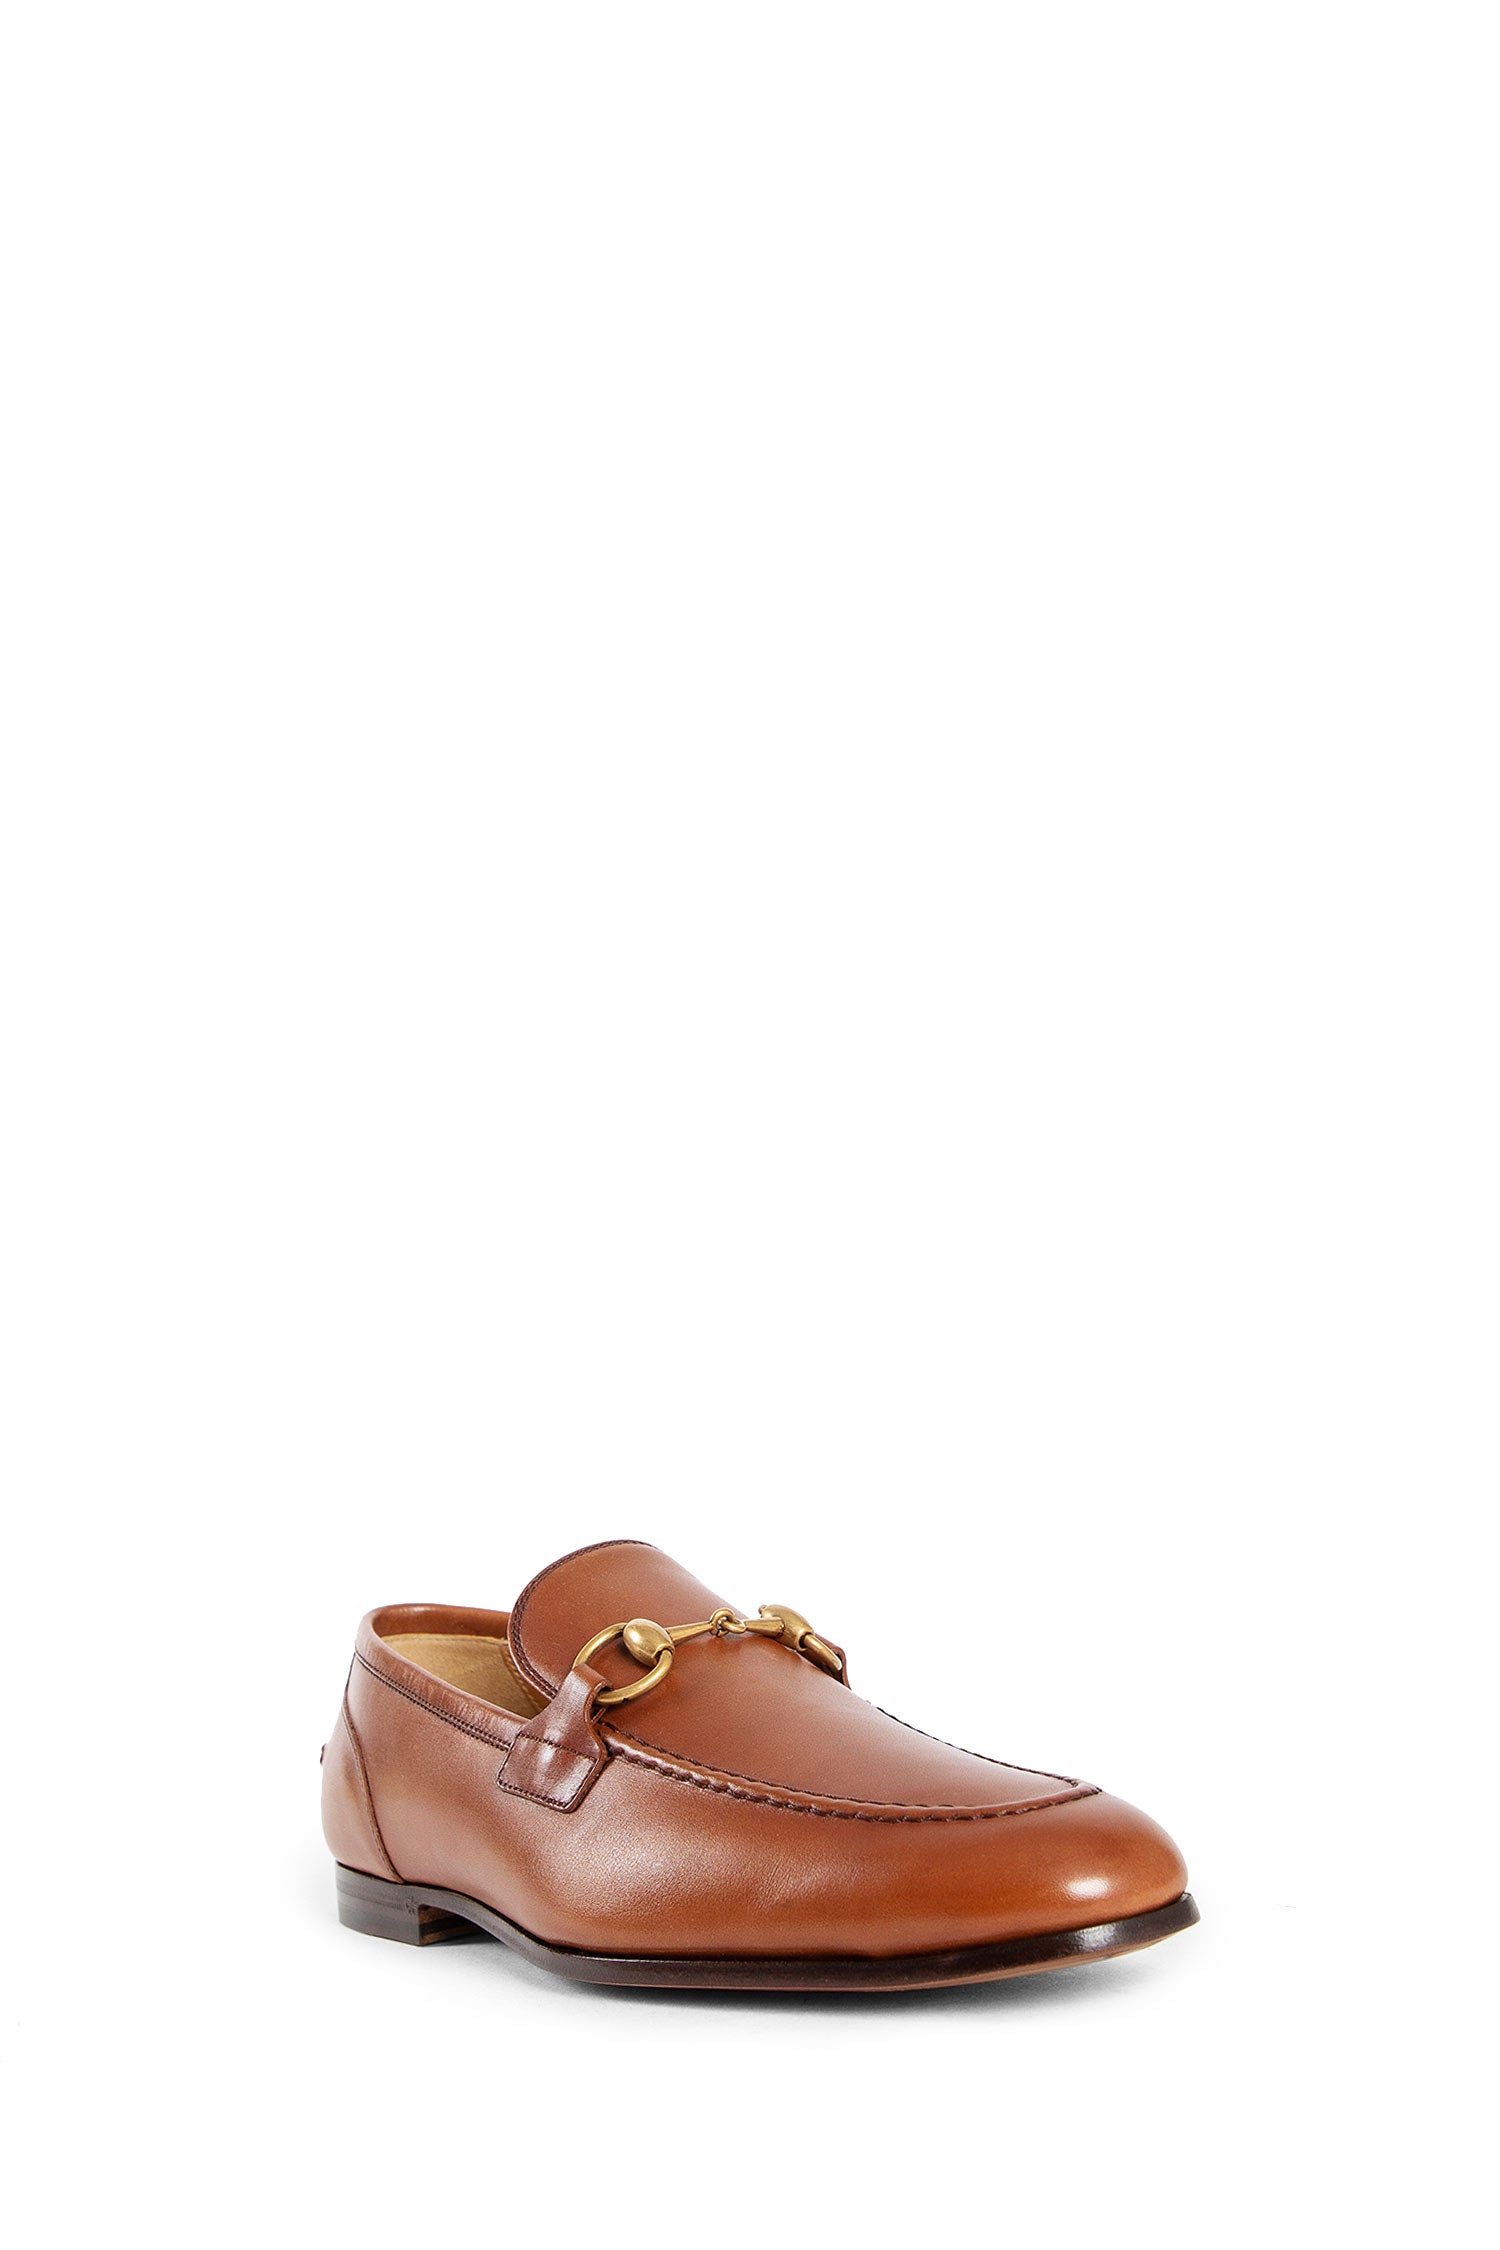 GUCCI MAN BROWN LOAFERS & FLATS